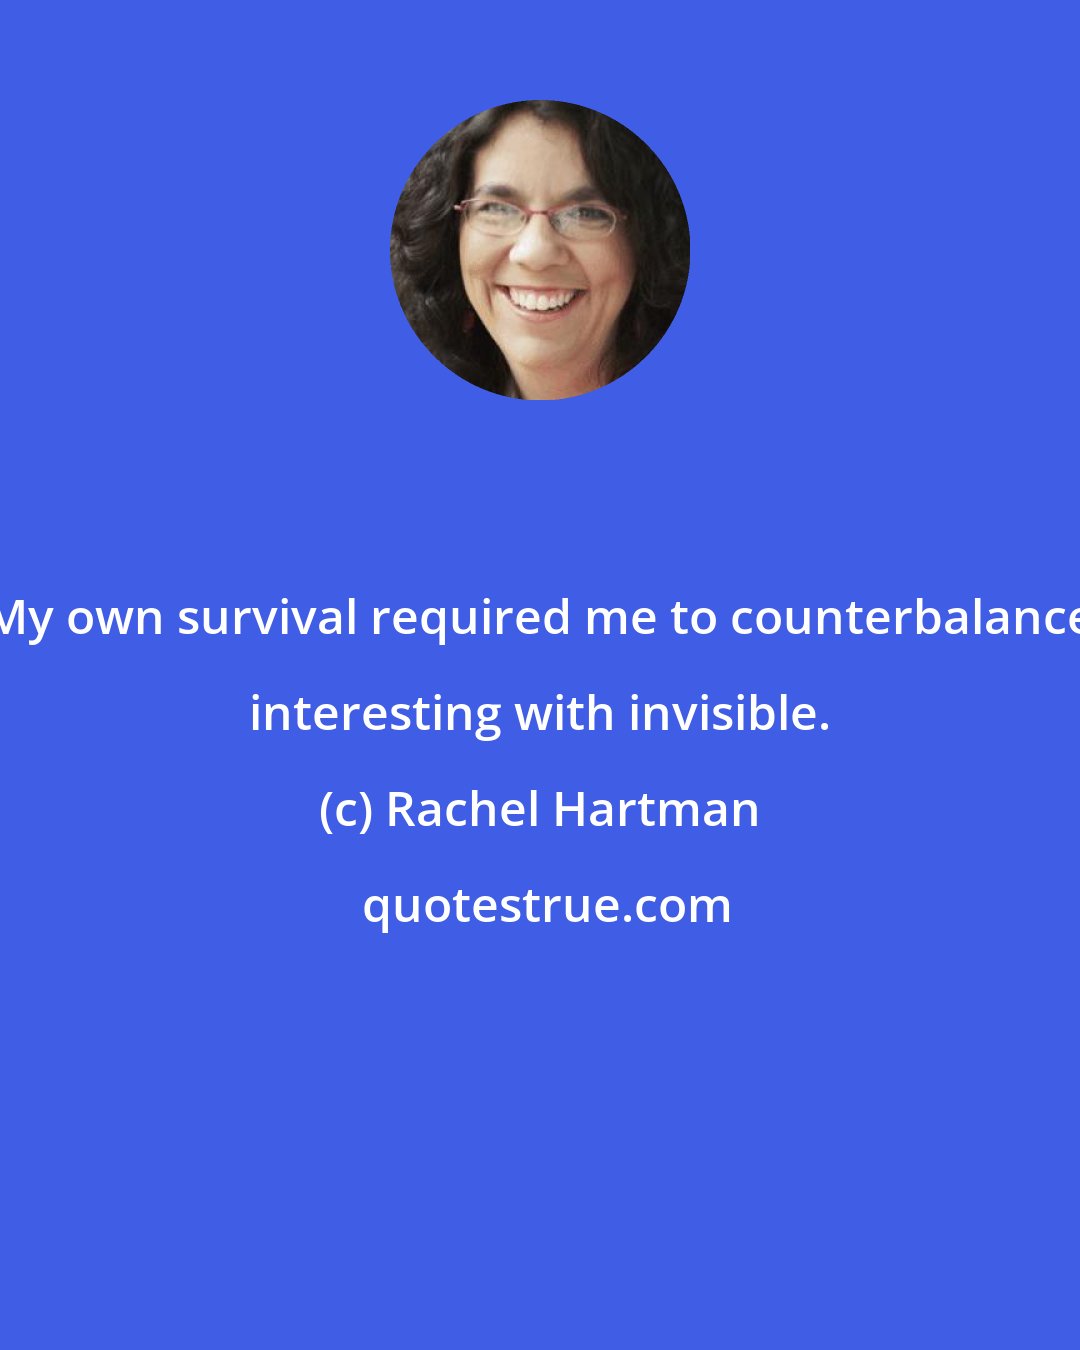 Rachel Hartman: My own survival required me to counterbalance interesting with invisible.